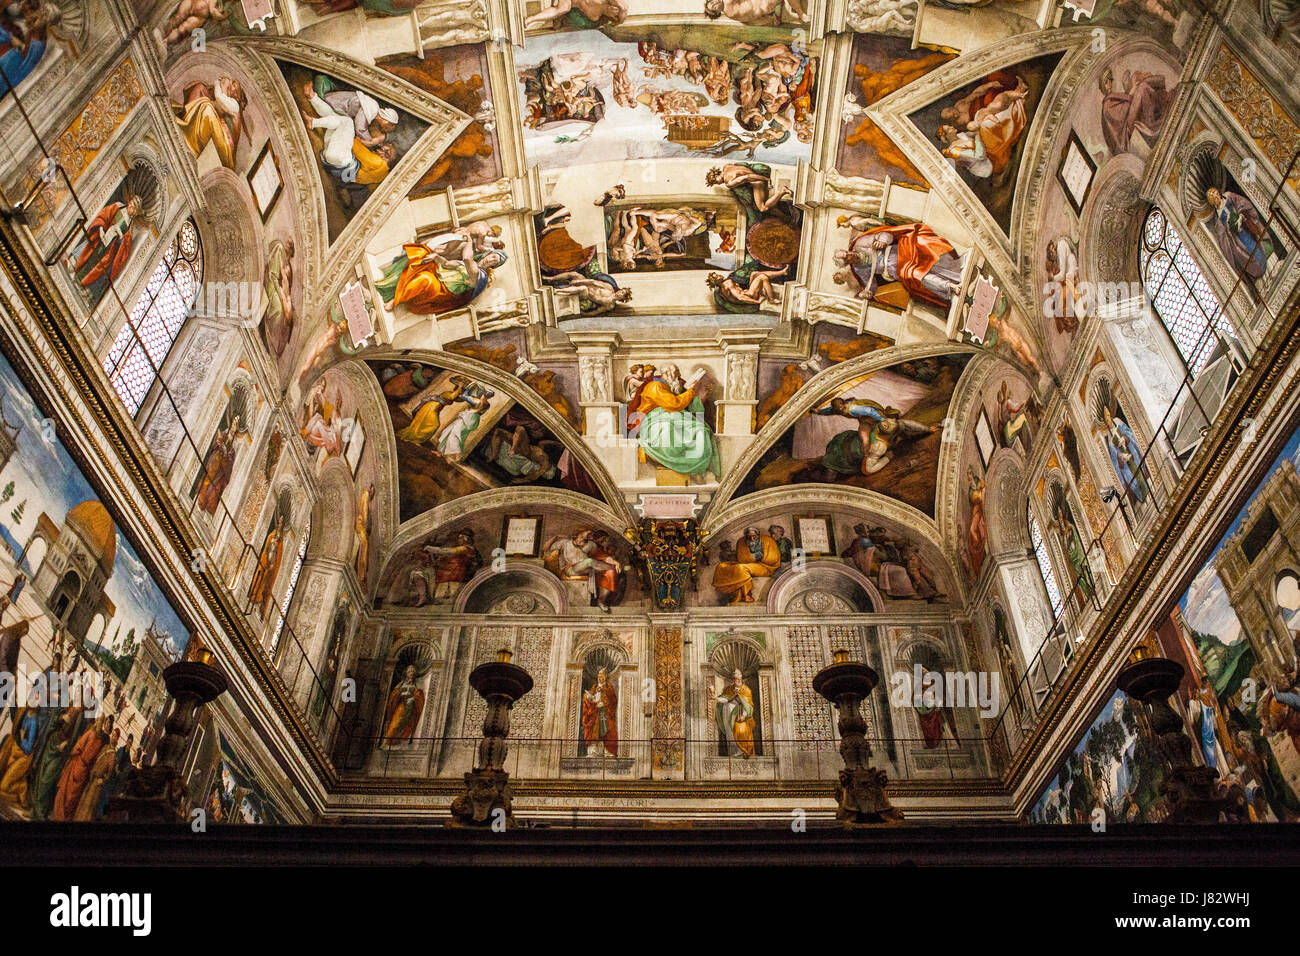 VATICAN CITY, ROME - MARCH 02, 2016: Interior and architectural details of the Sistine chapel, March 02, 2016, Vatican city, Rome, Italy. Stock Photo